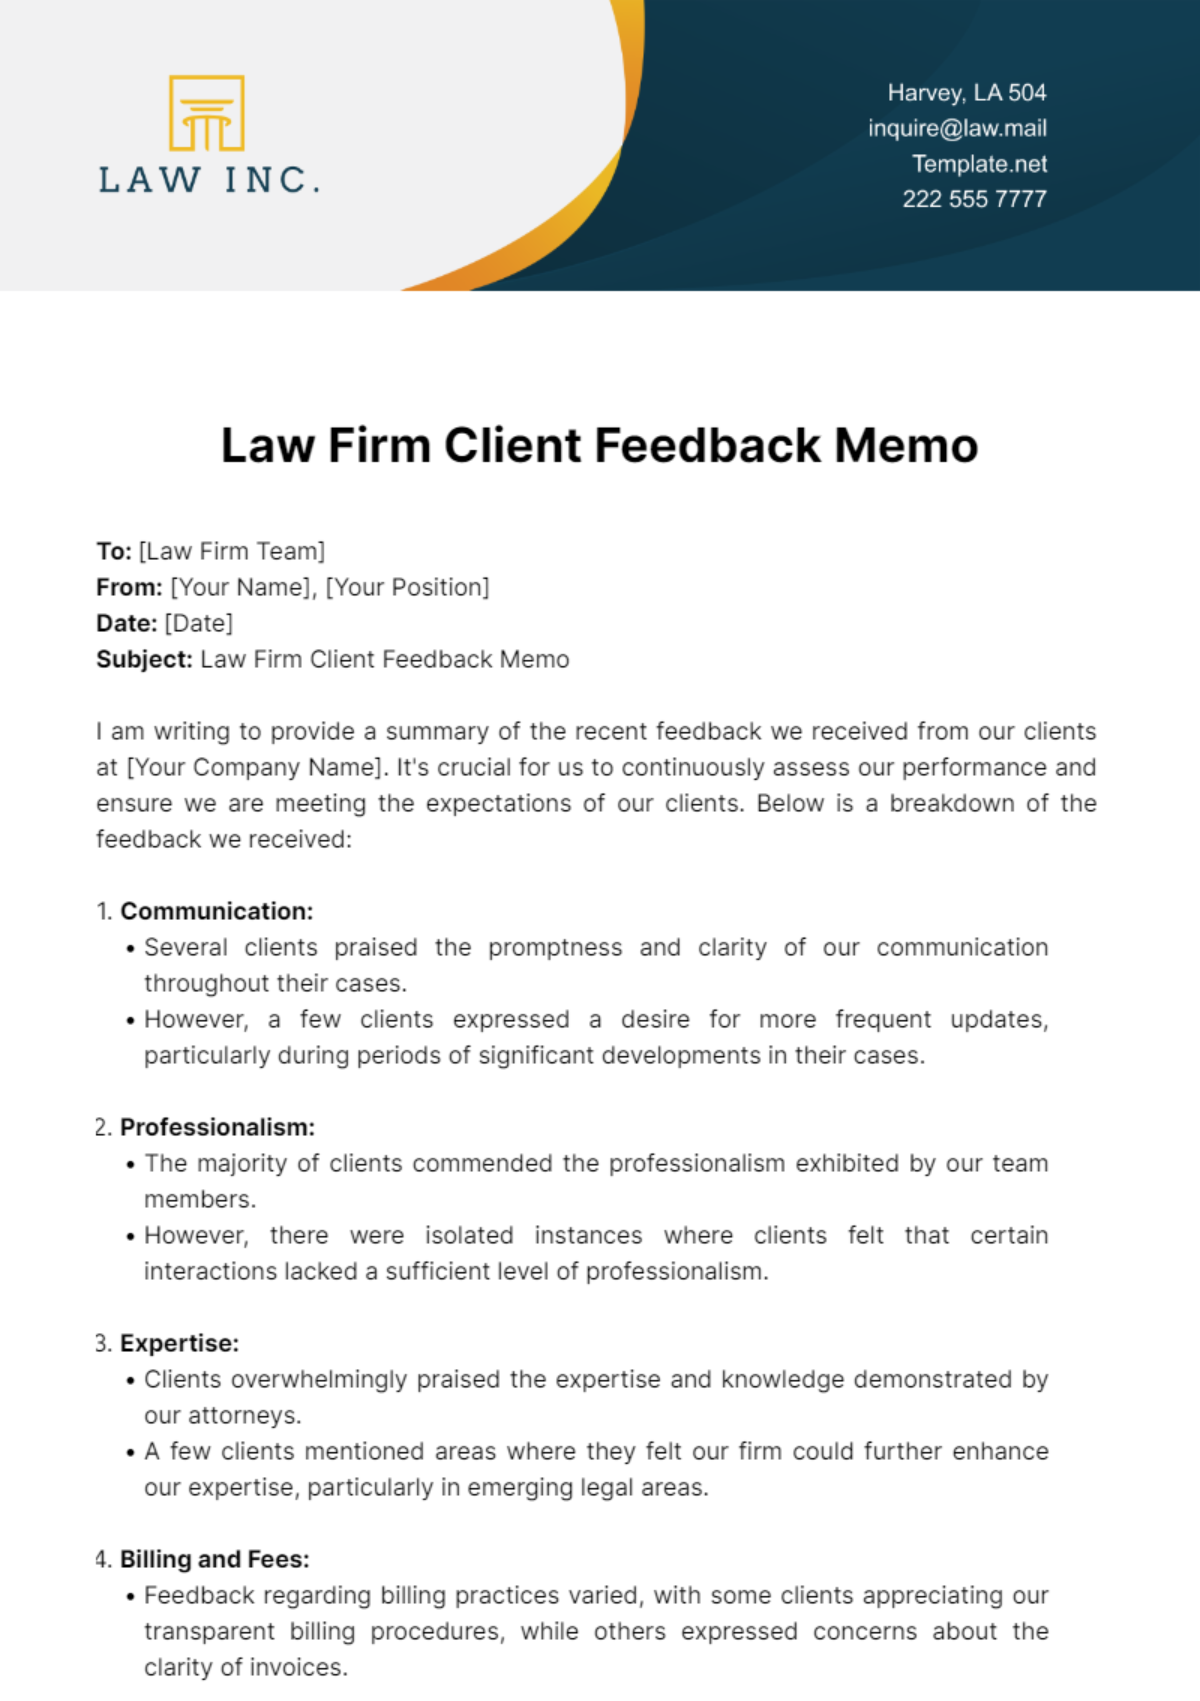 Free Law Firm Client Feedback Memo Template